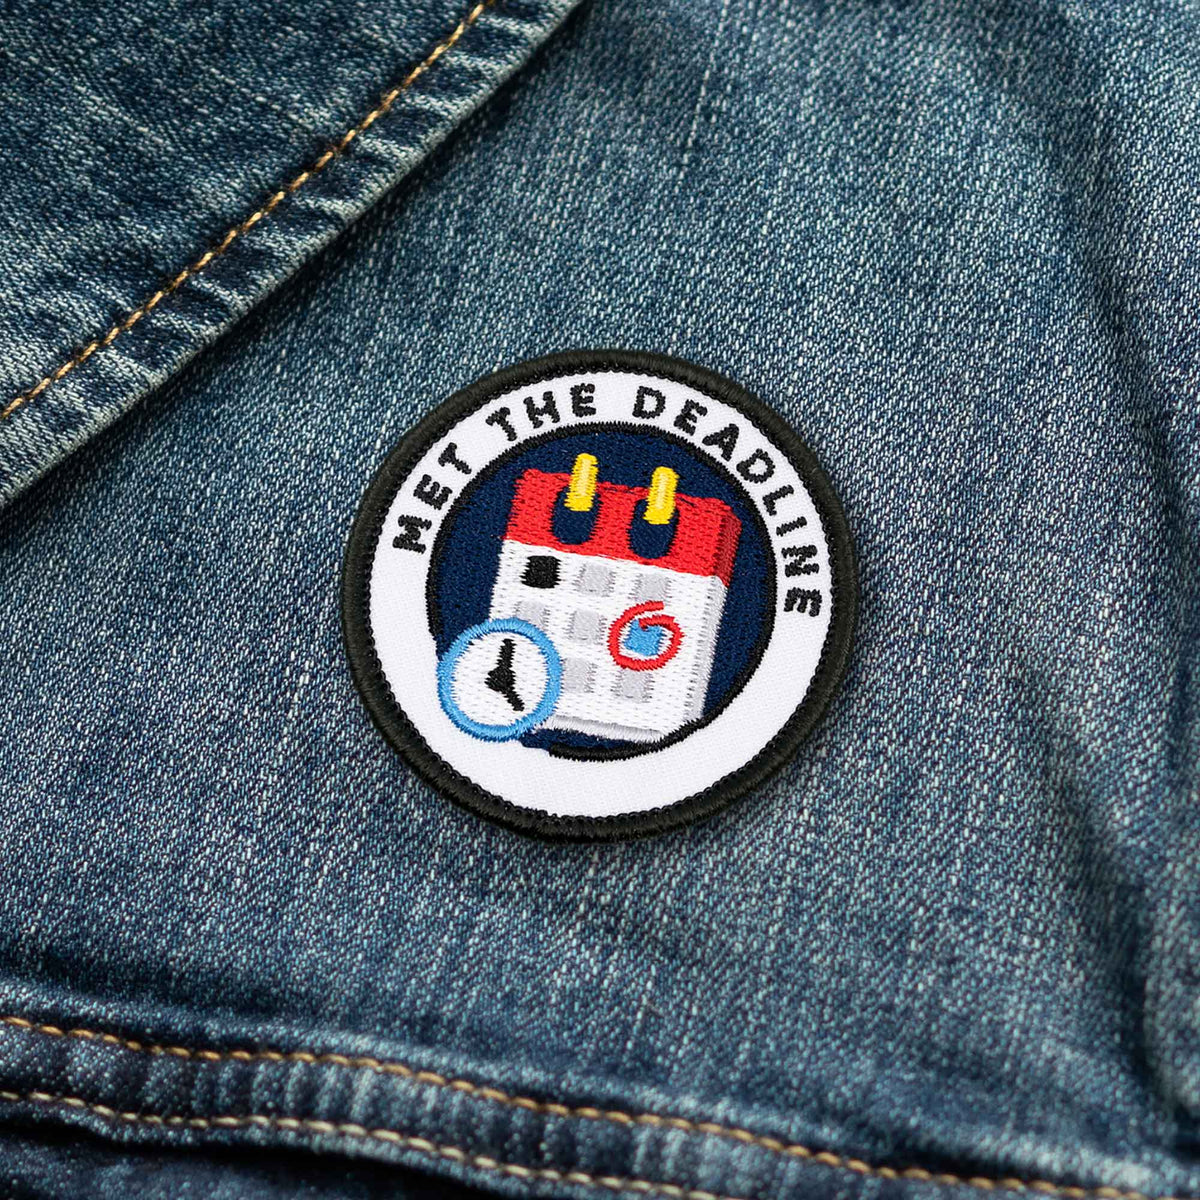 Met The Deadline adulting merit badge patch for adults on denim jacket